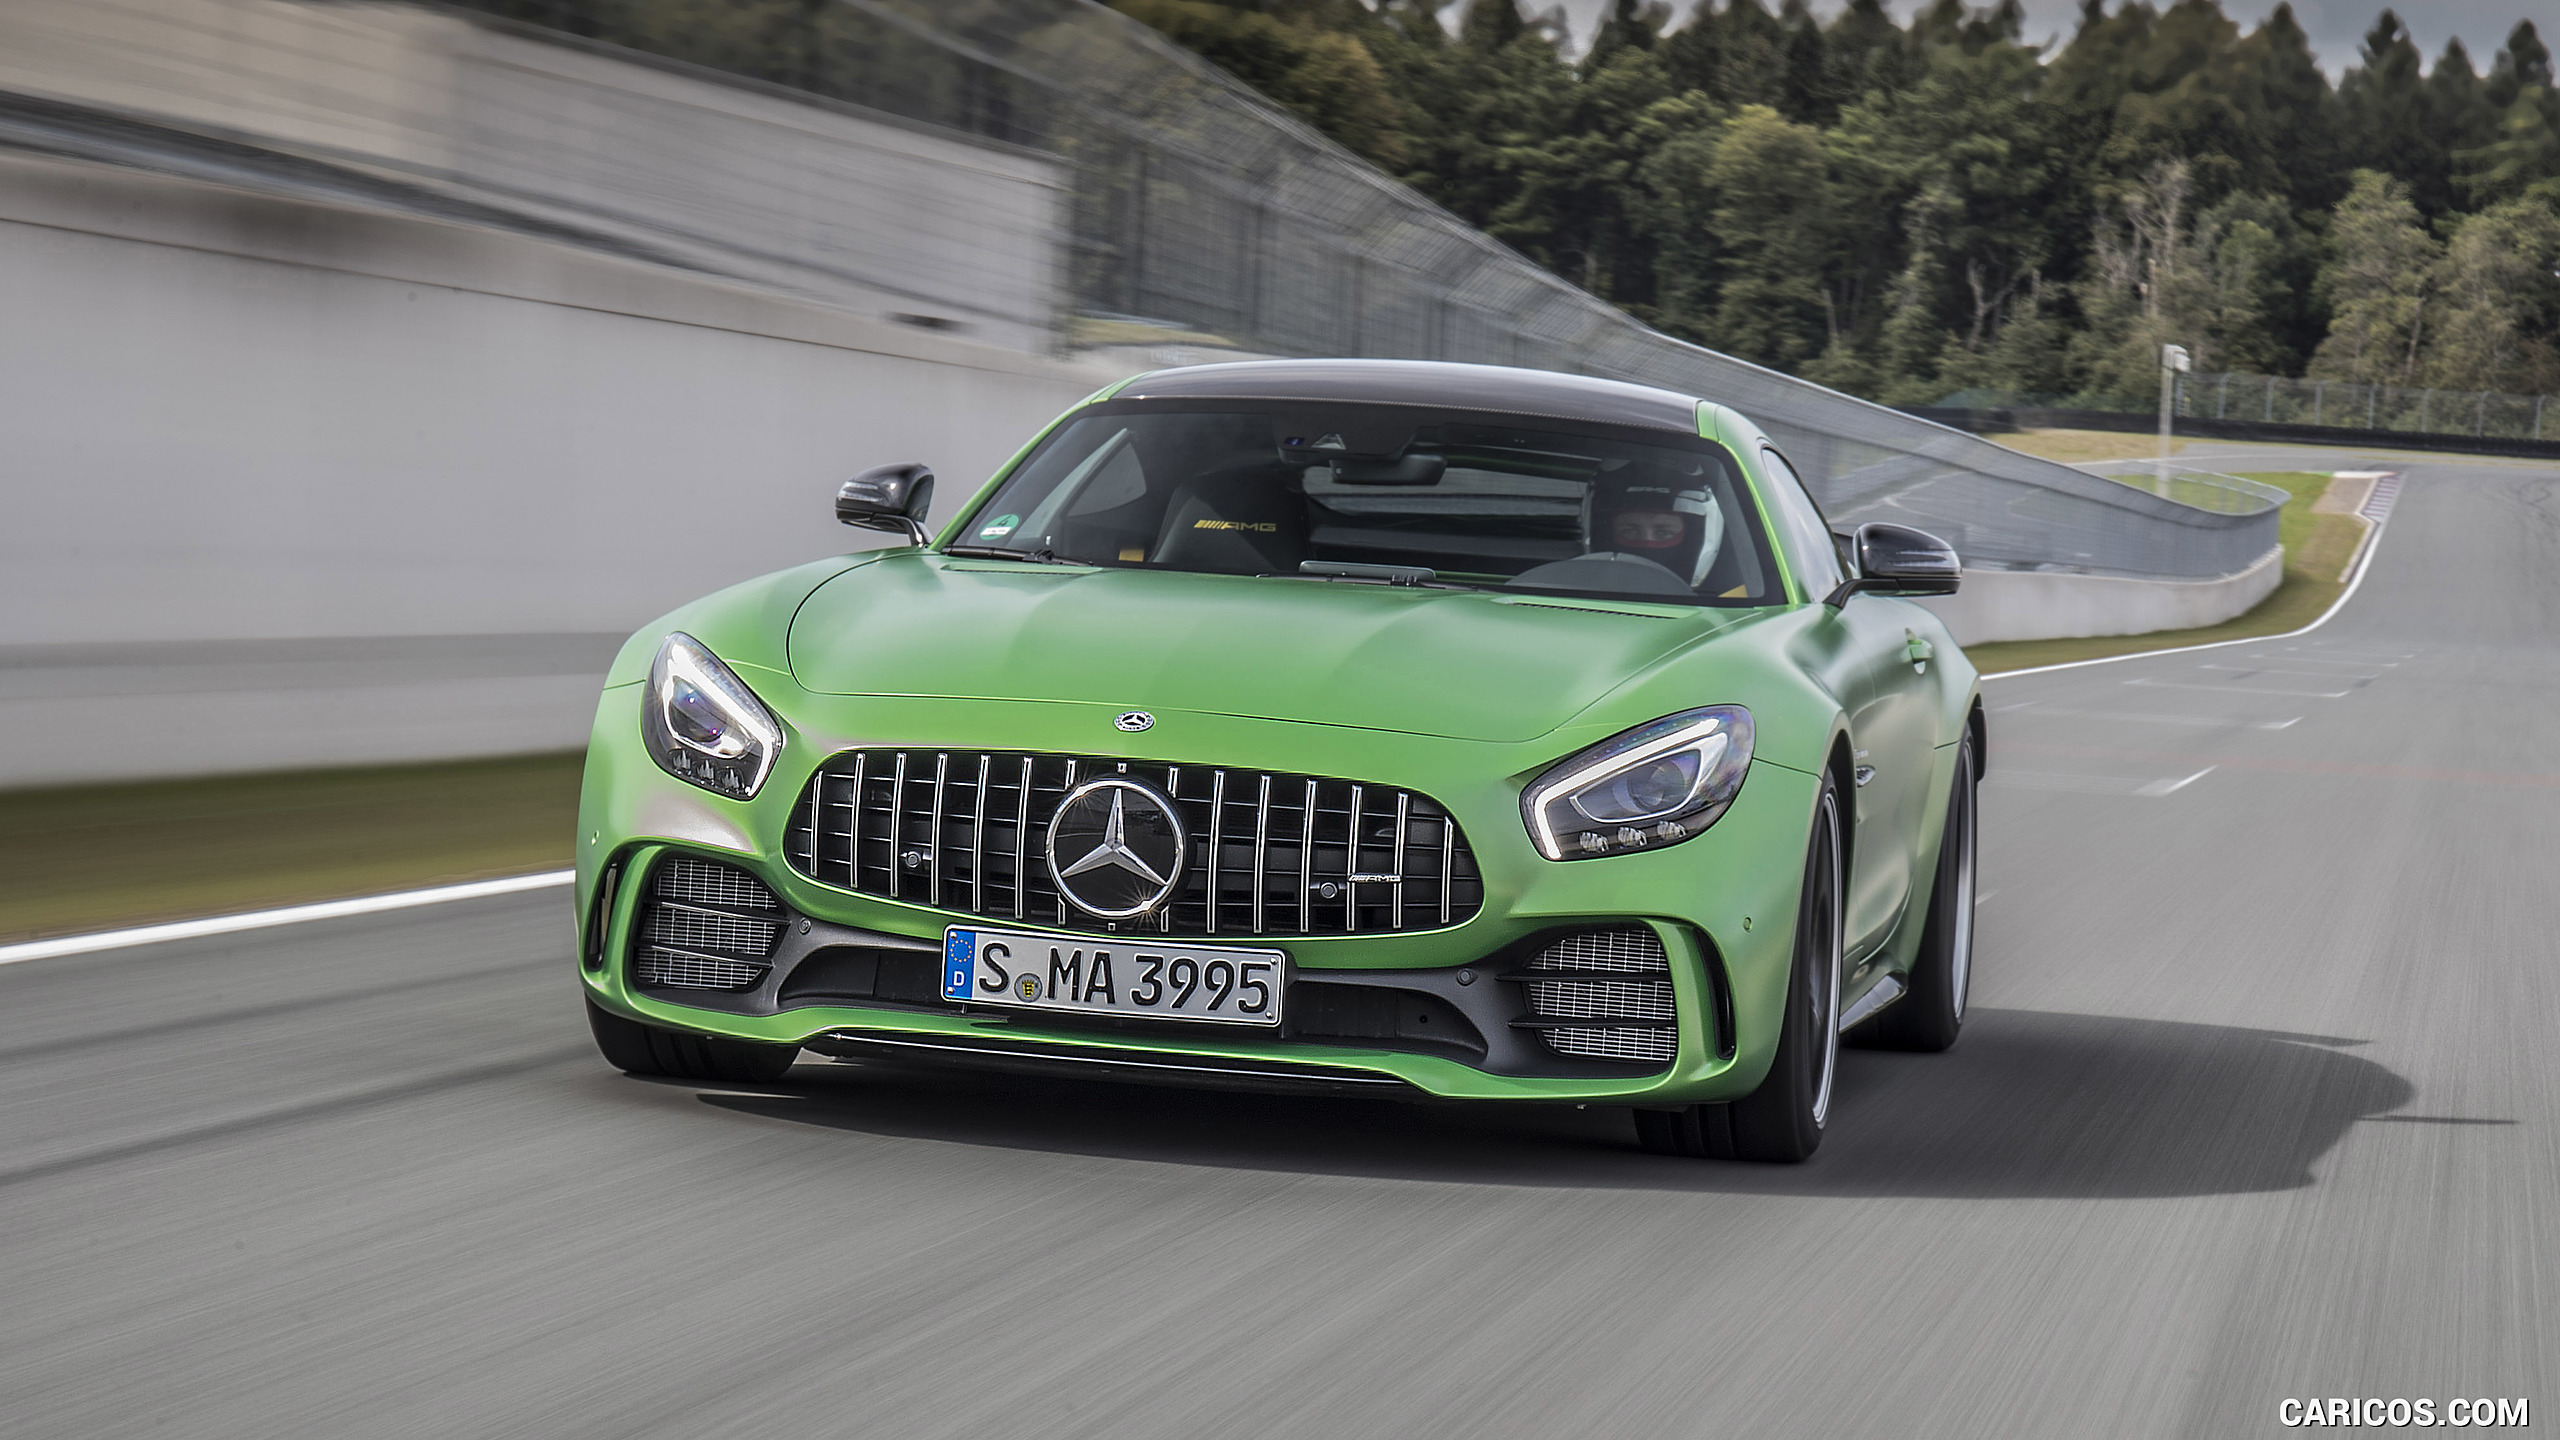 2017 Mercedes-AMG GT R Coupe - Front, #139 of 182